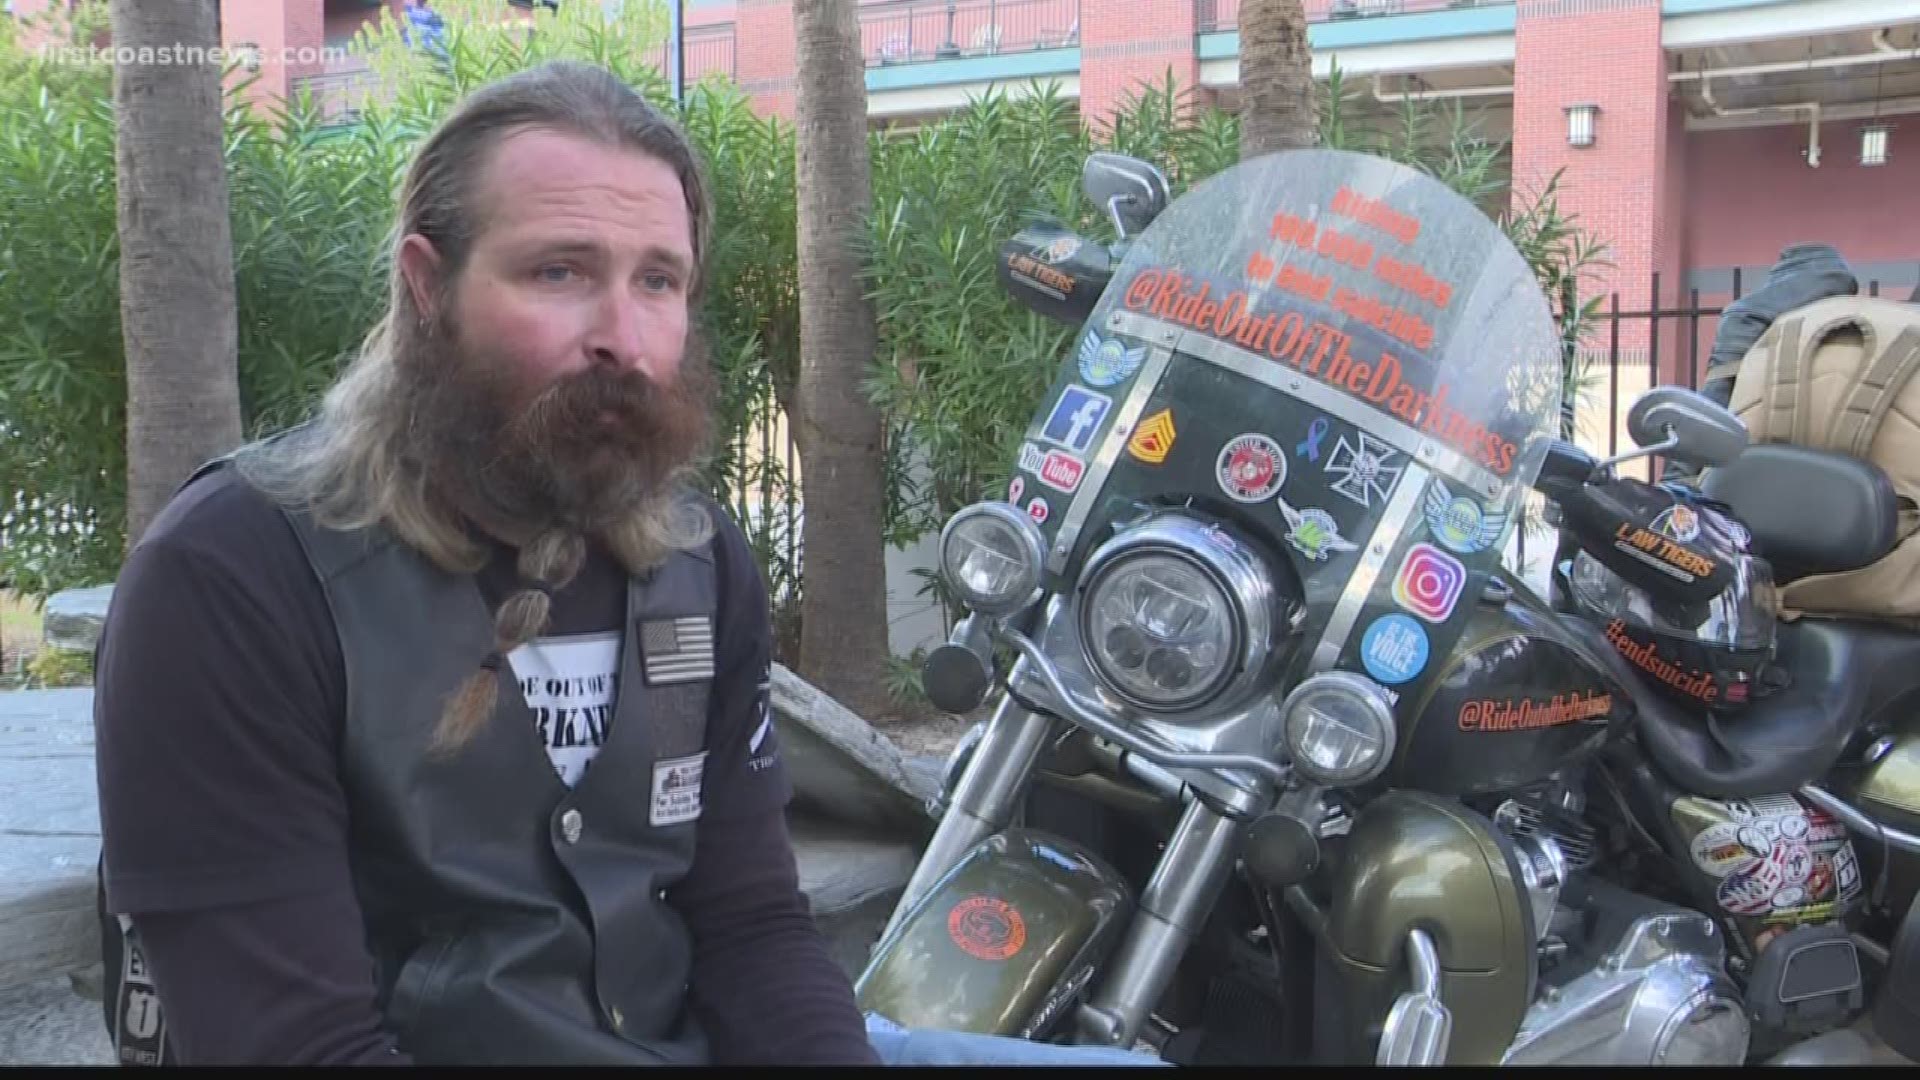 Grant Bourne, a retired Marine from San Diego, is nearing his goal of riding his Harley Davidson motorcycle 100,000 miles - four times the circumference of the planet - a journey he began Jan. 1.